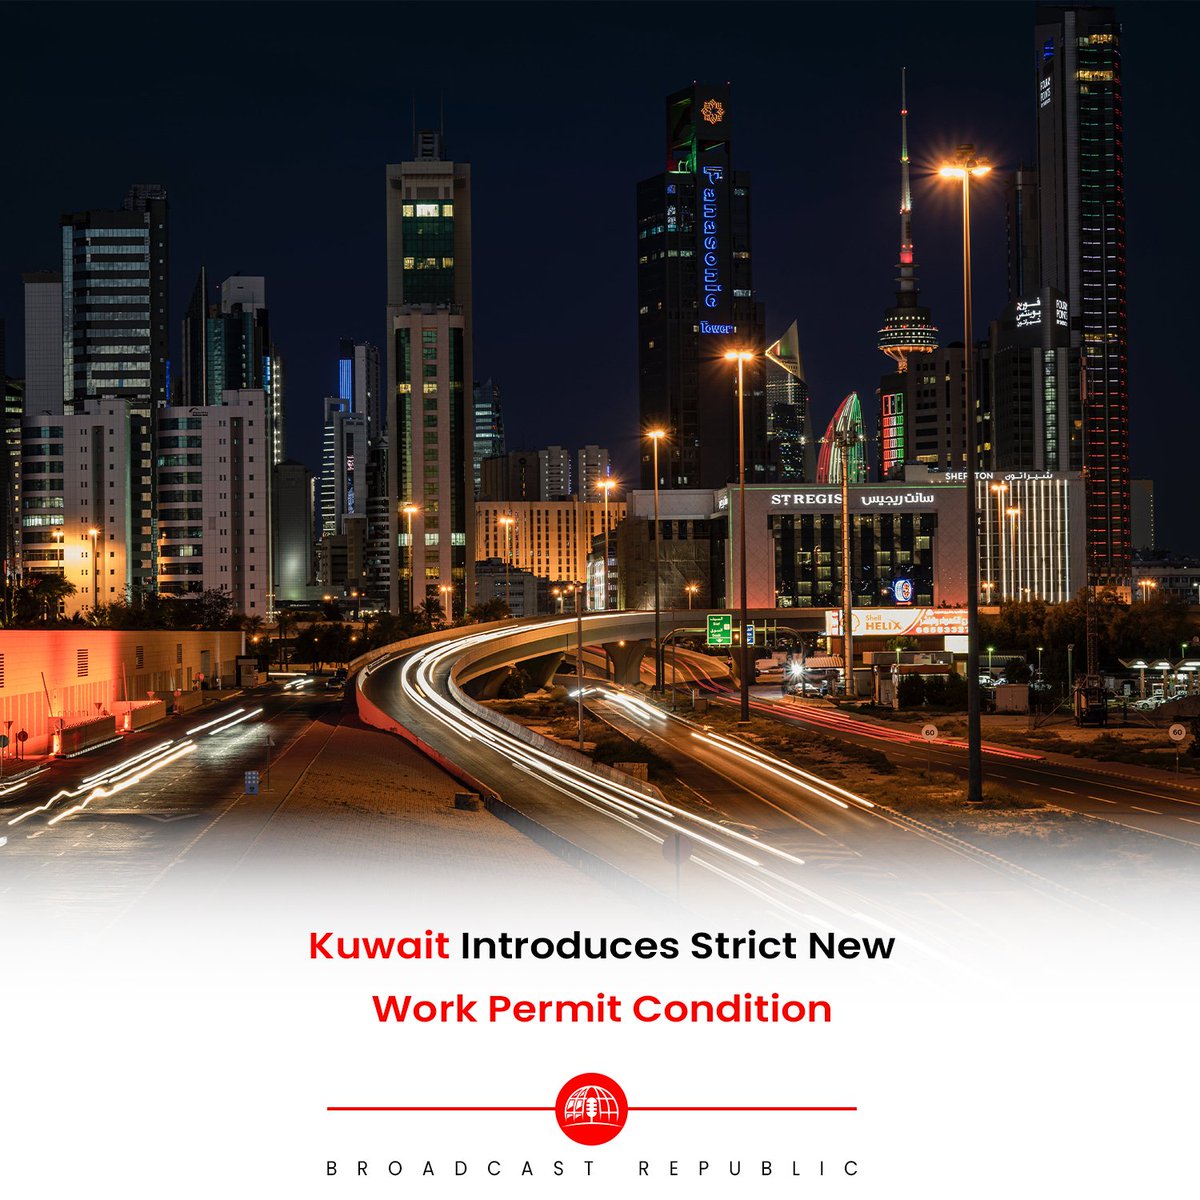 Kuwait has unveiled a new measure requiring practical tests for skilled technical workers as a prerequisite for obtaining work permits. 

#BroadcastRepublic #KuwaitLaborMarket #WorkPermits #SkillAssessment #TechnicalTests #LaborMarketDevelopment #SmartRecruitment